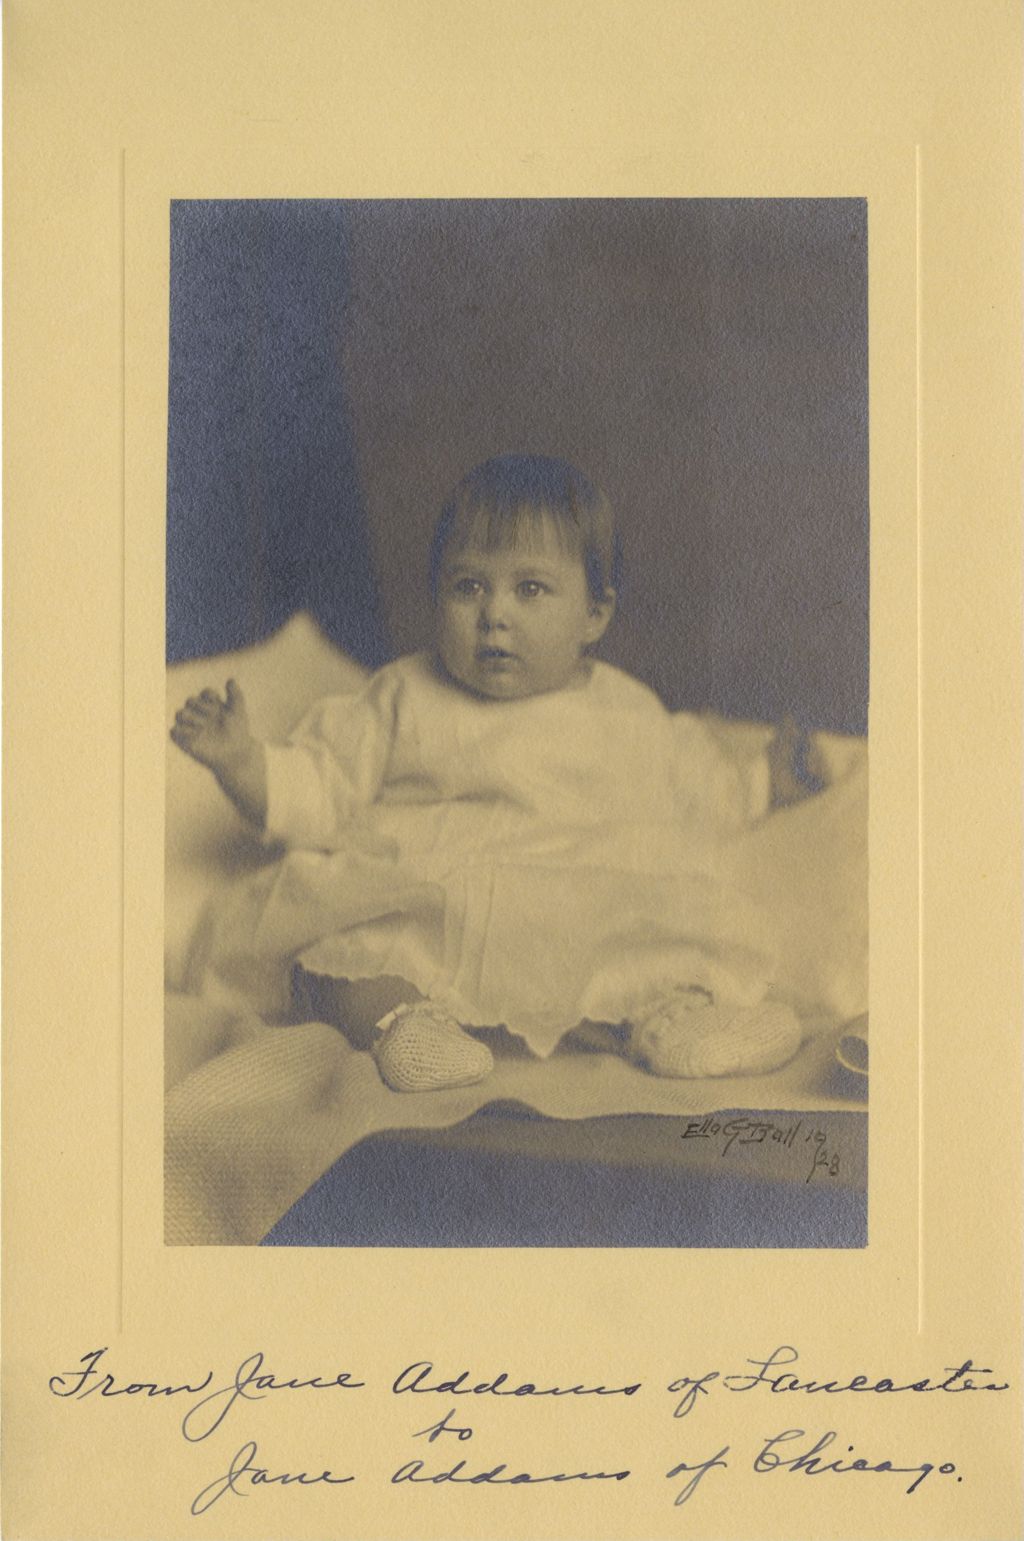 Photographic portrait of baby girl named after Jane Addams